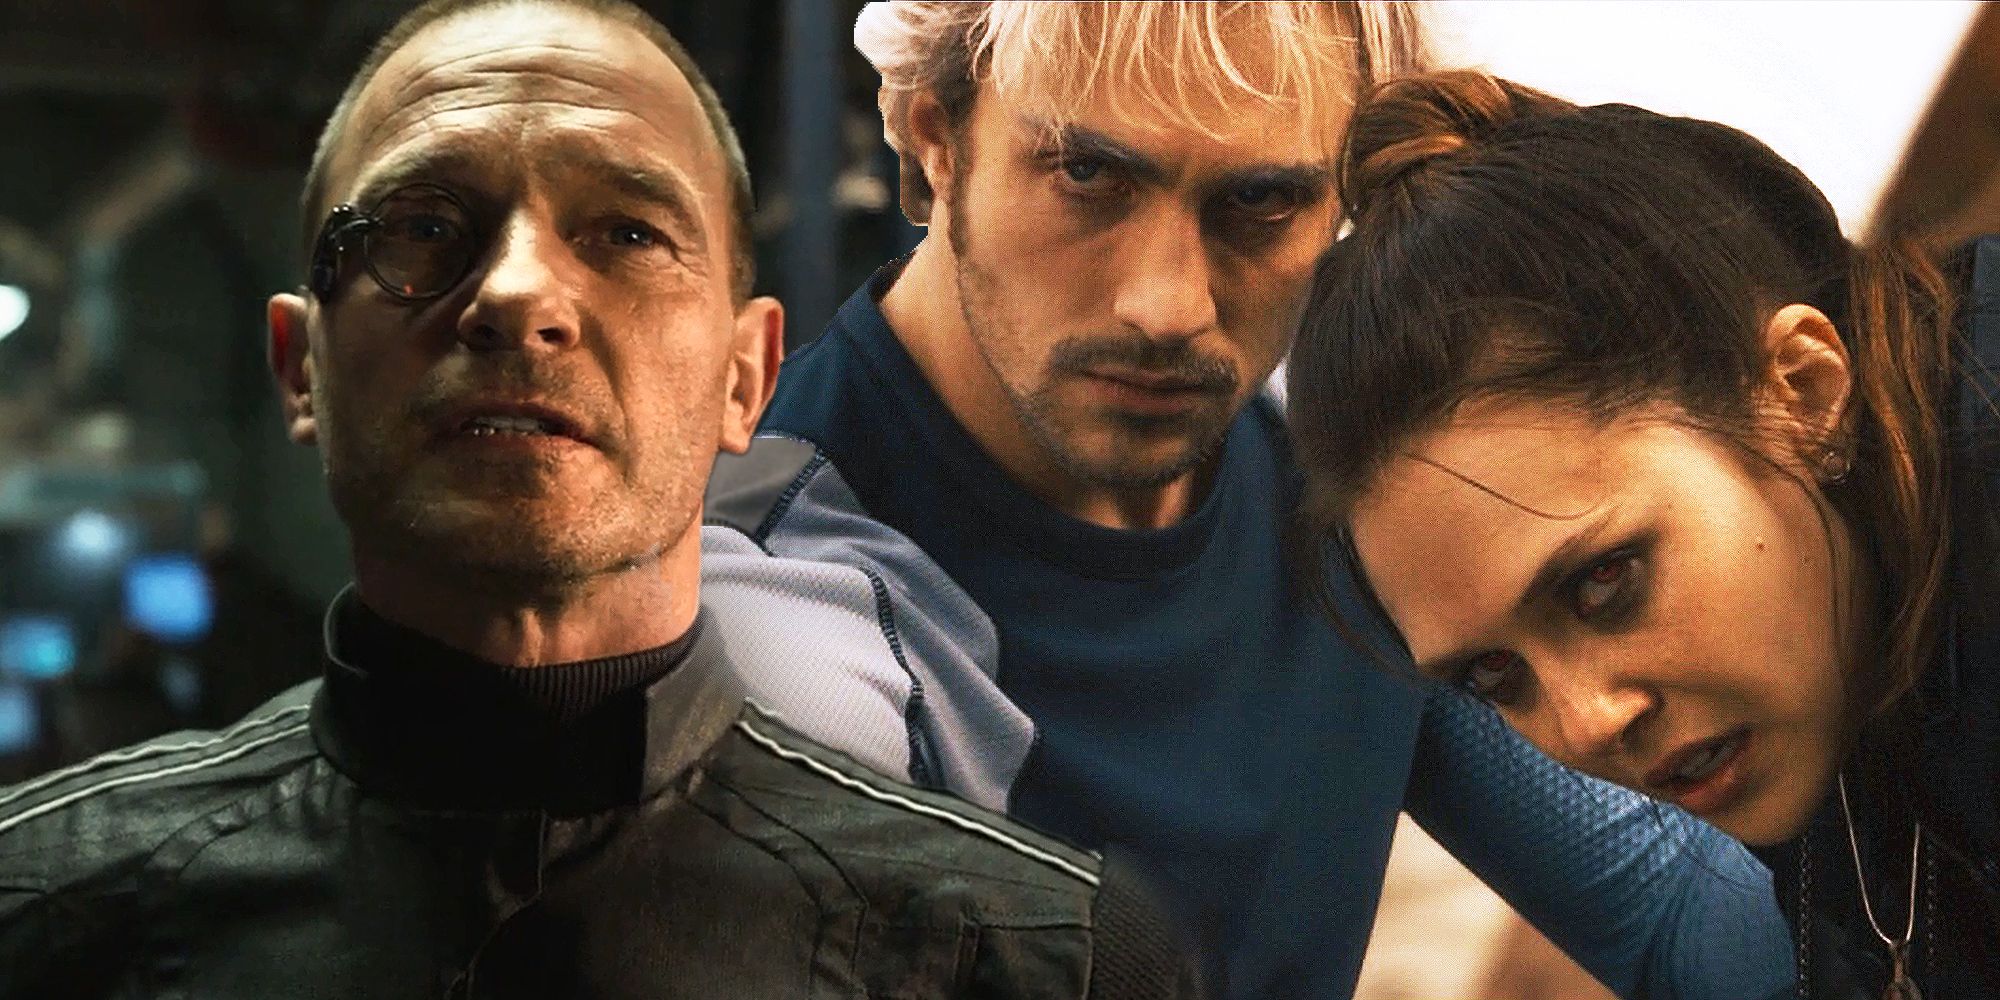 Wolfgang von Strucker and the Maximoff Twins in Avengers Age of Ultron